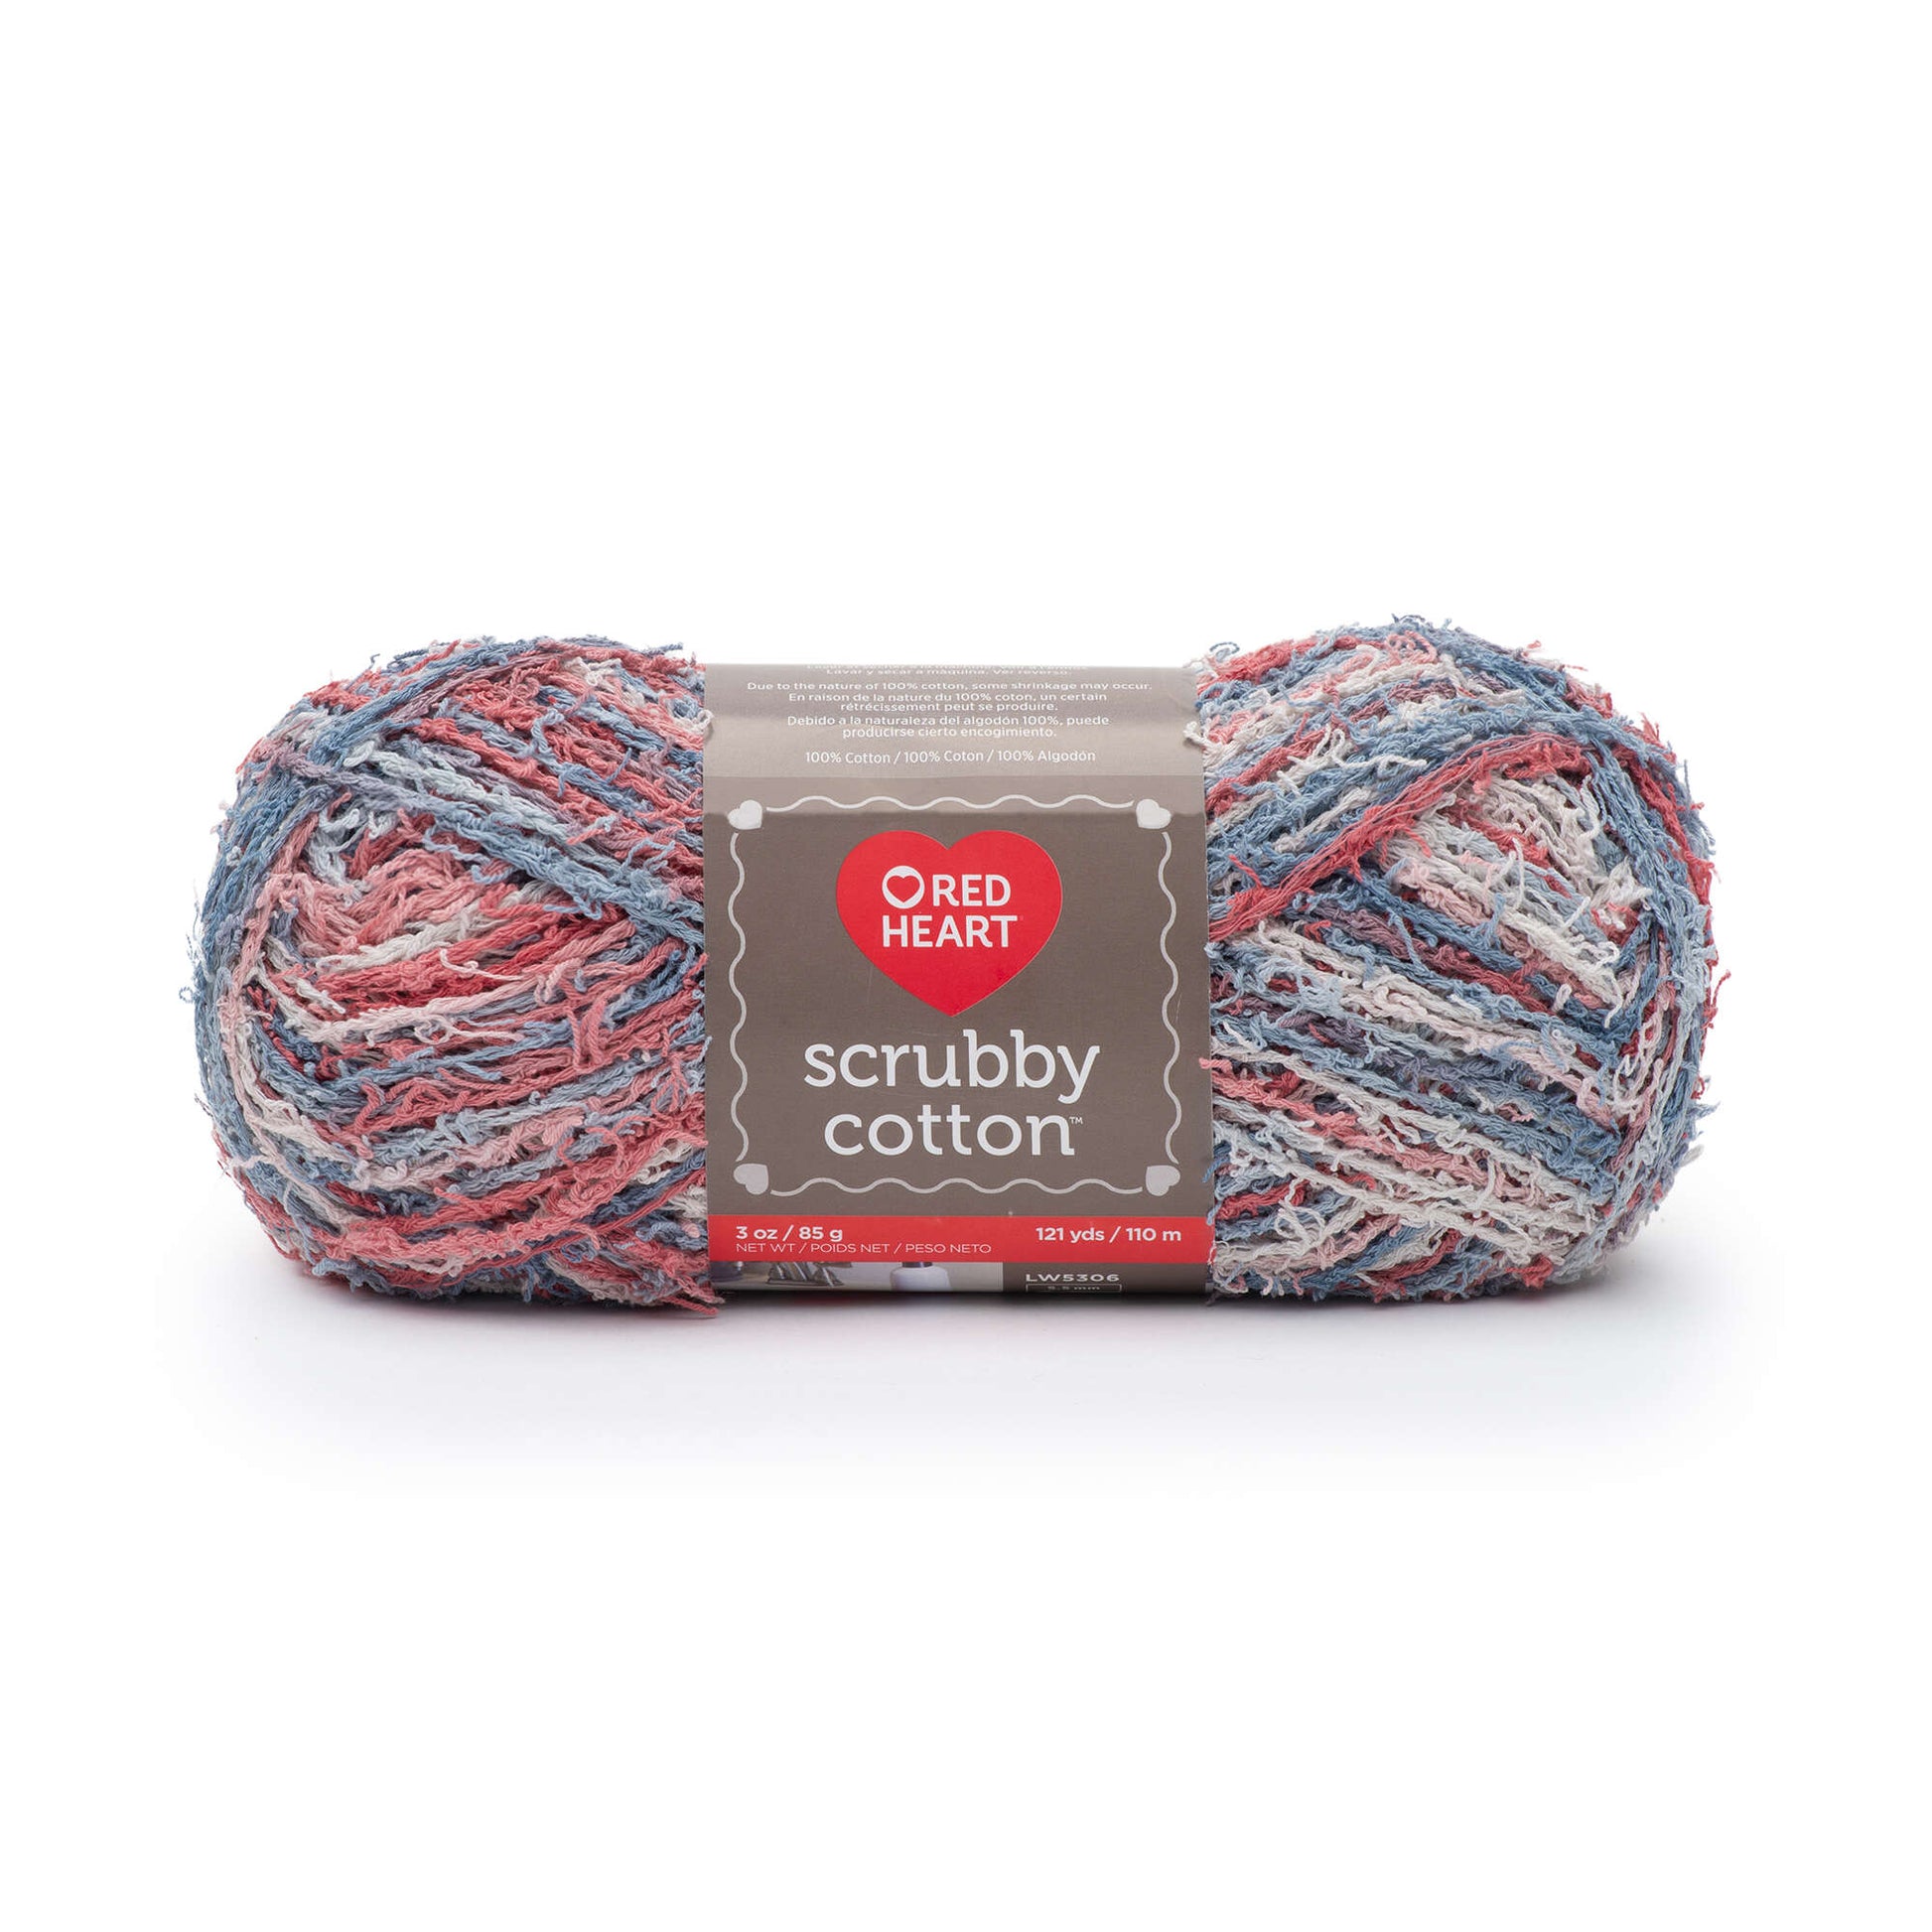 Red Heart Scrubby Cotton Yarn - Clearance shades Nautical Print